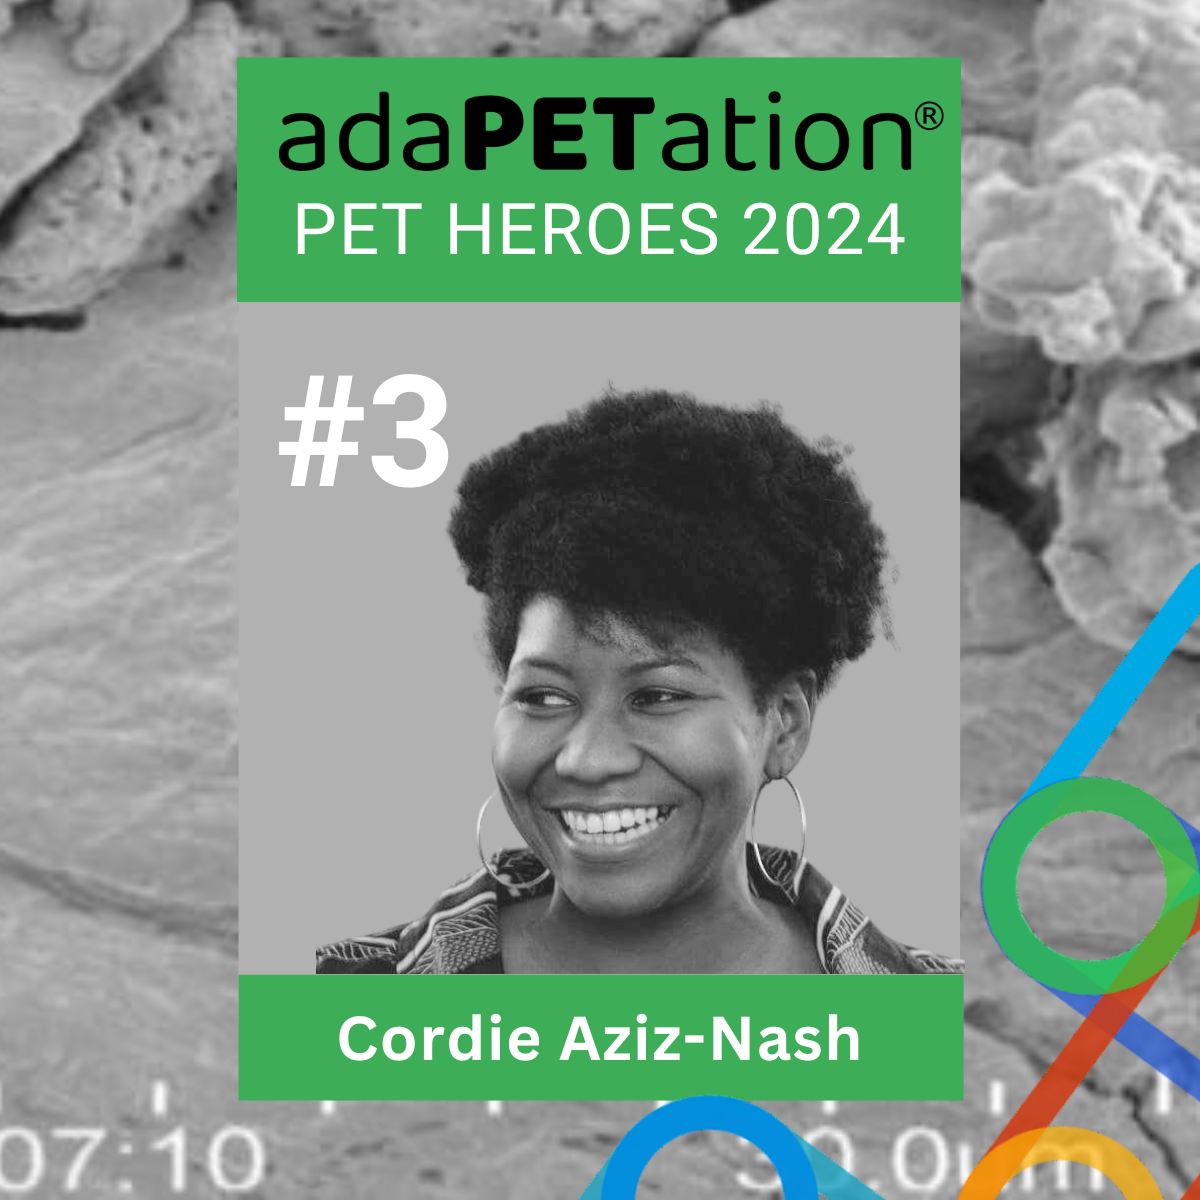 Our third nominee for PET Heroes 2024 is Cordie Aziz-Nash, founder of 360 Environment